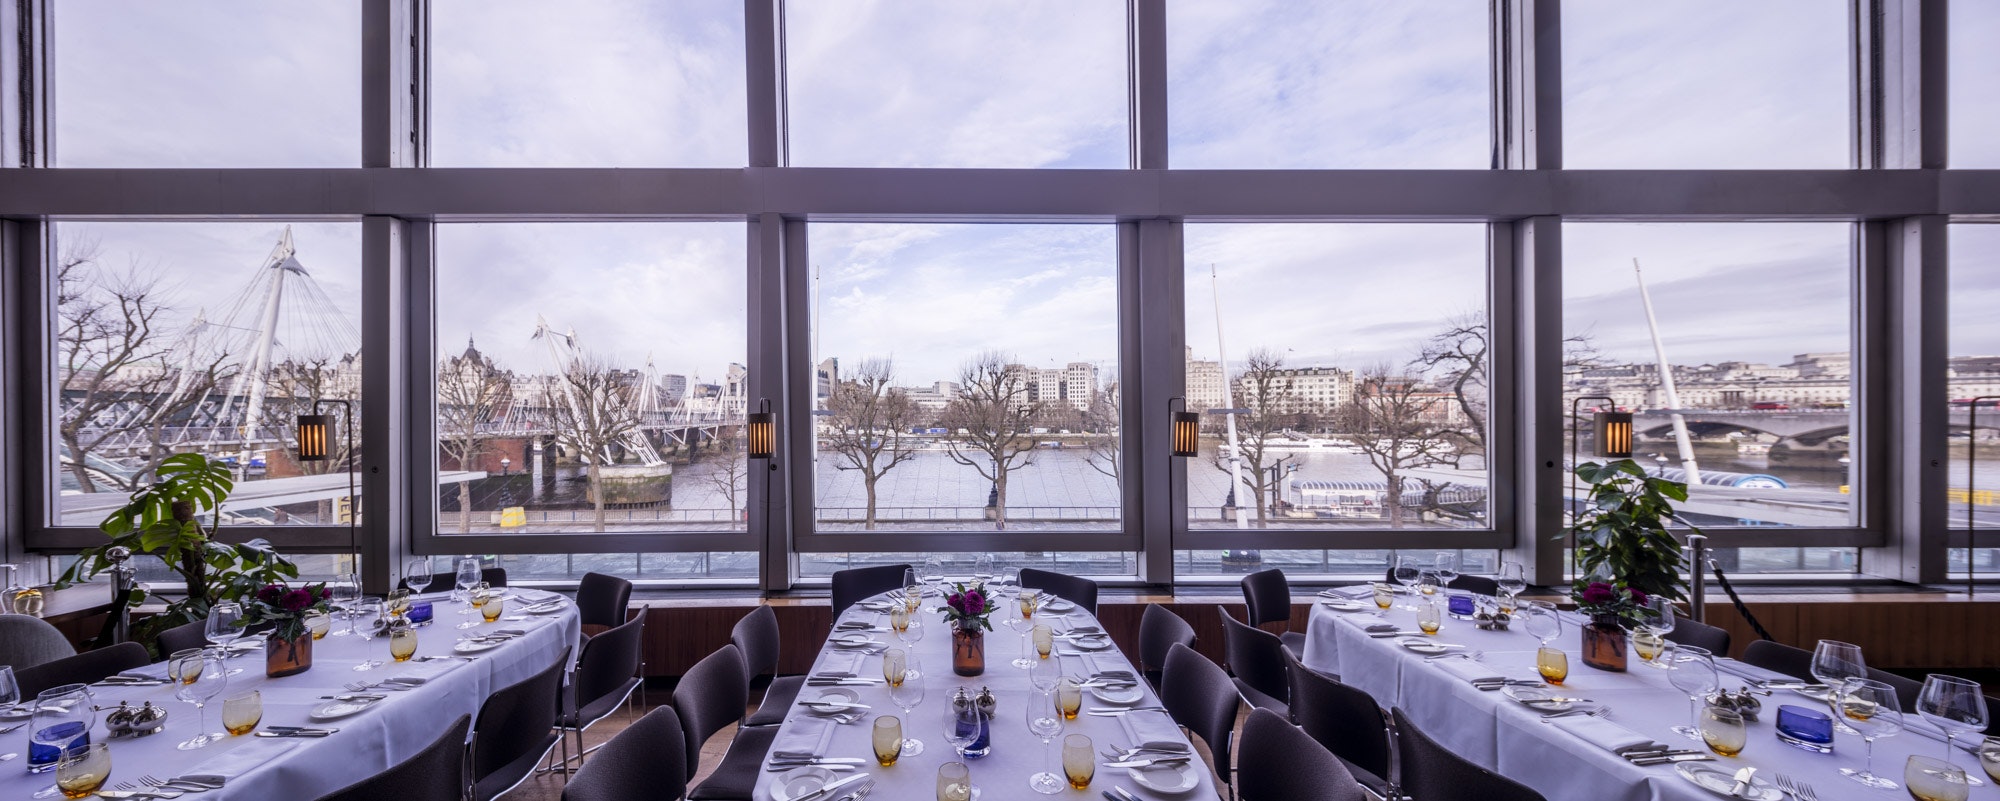 Affordable Private Dining Rooms Venues in London - Skylon